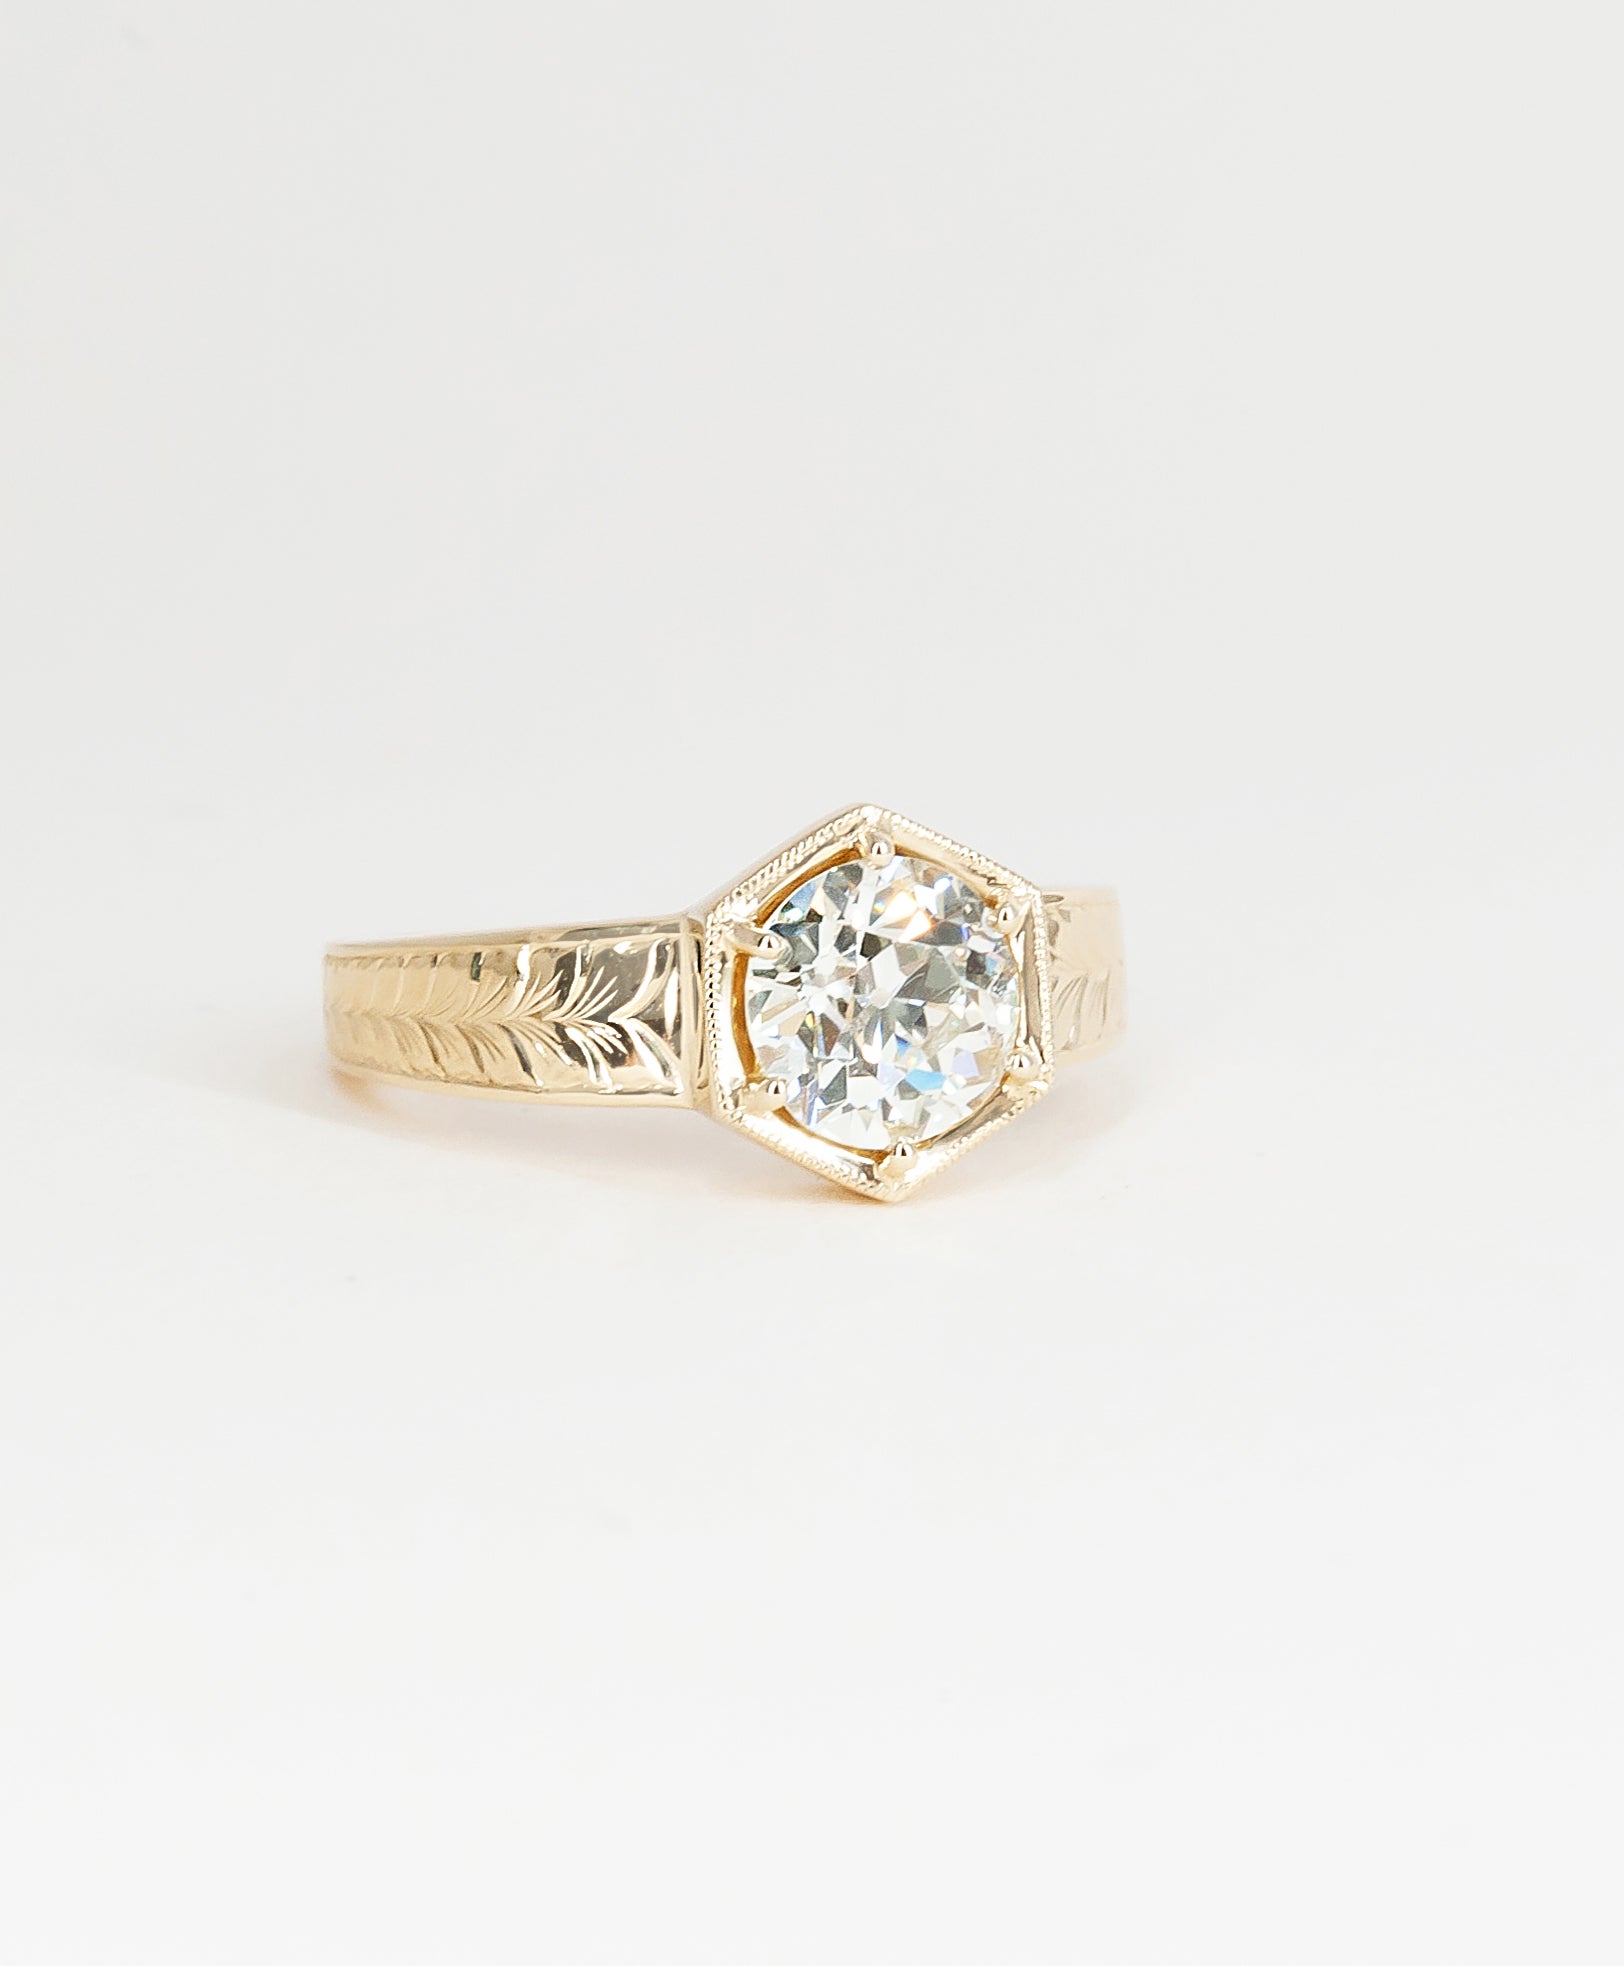 Alex's gorgeous final ring featuring her antique diamond accented by wheat-pattern engravings